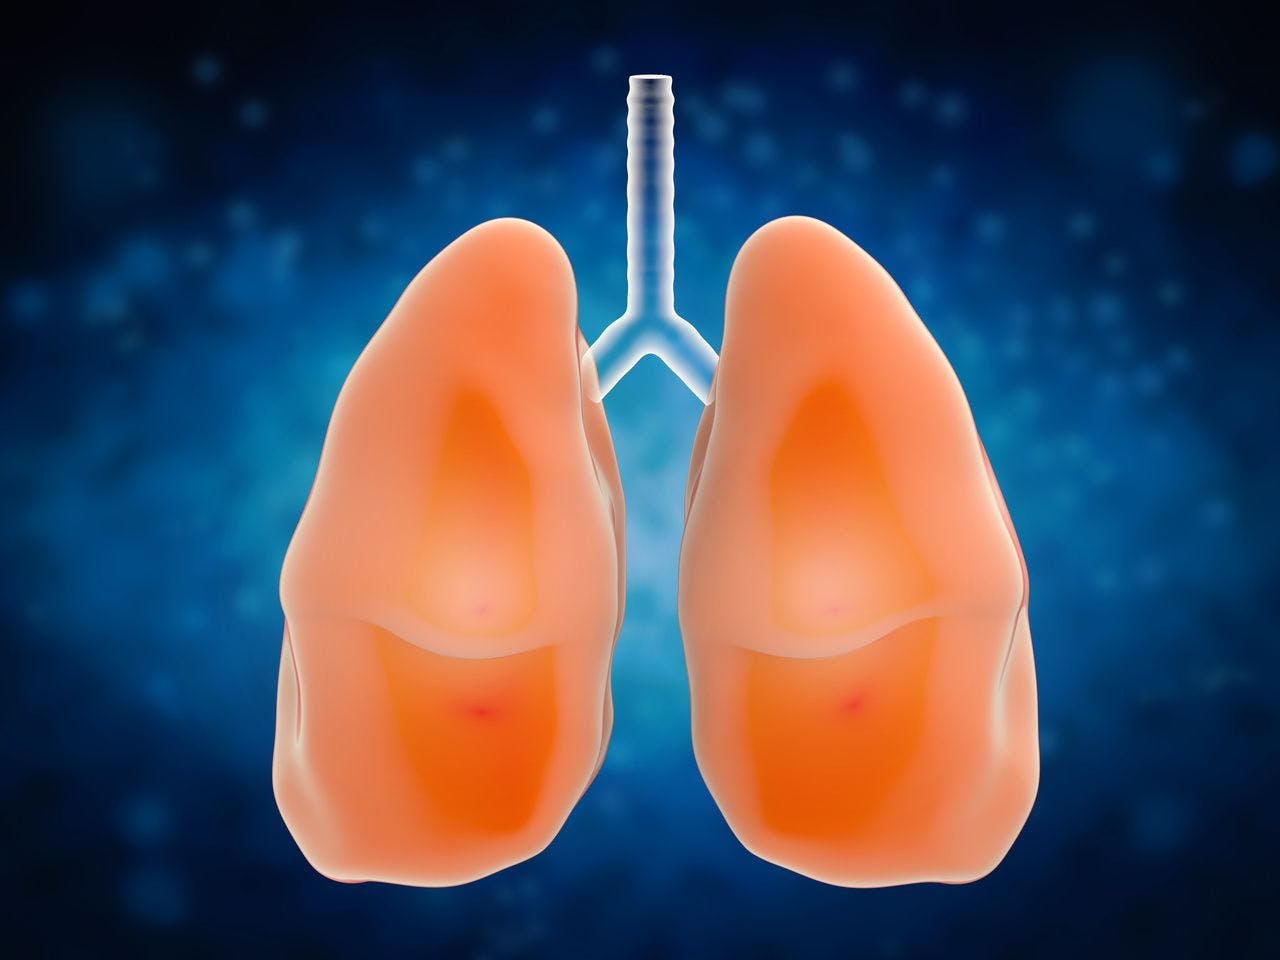 Triple Therapy at 2 Doses Appears to Reduce COPD Exacerbations, Study Says